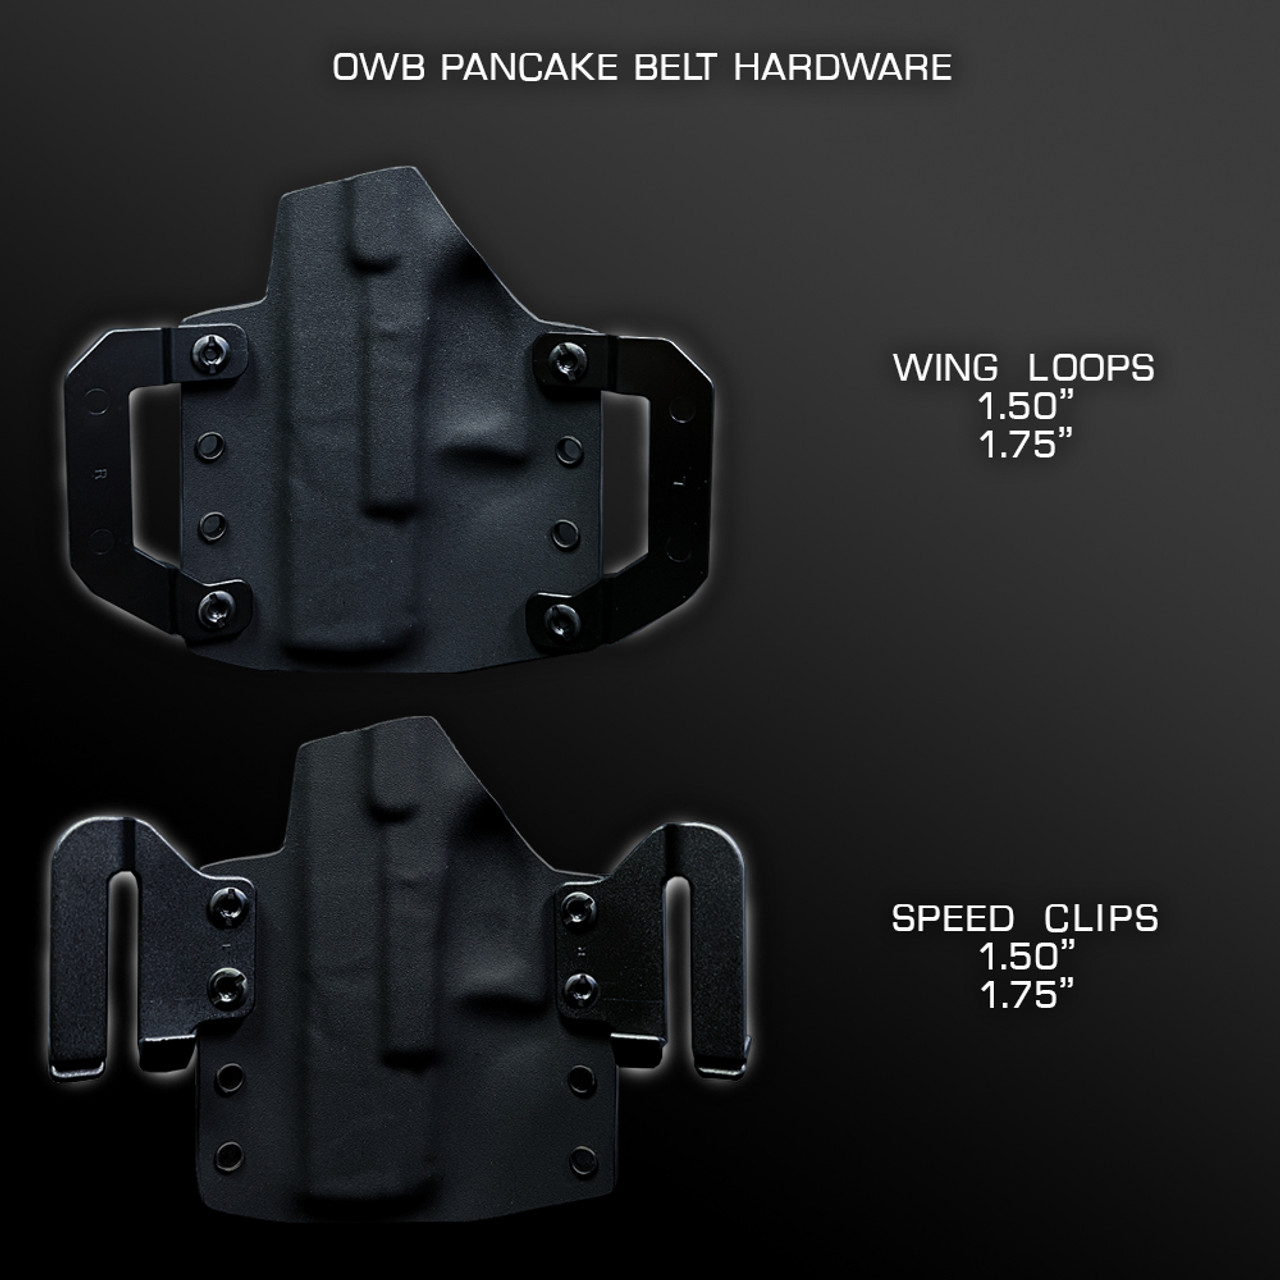 OWB (Outside Waist Band) - Tight Fit (Pancake) OWB - CQC - Close Quarters  Carry